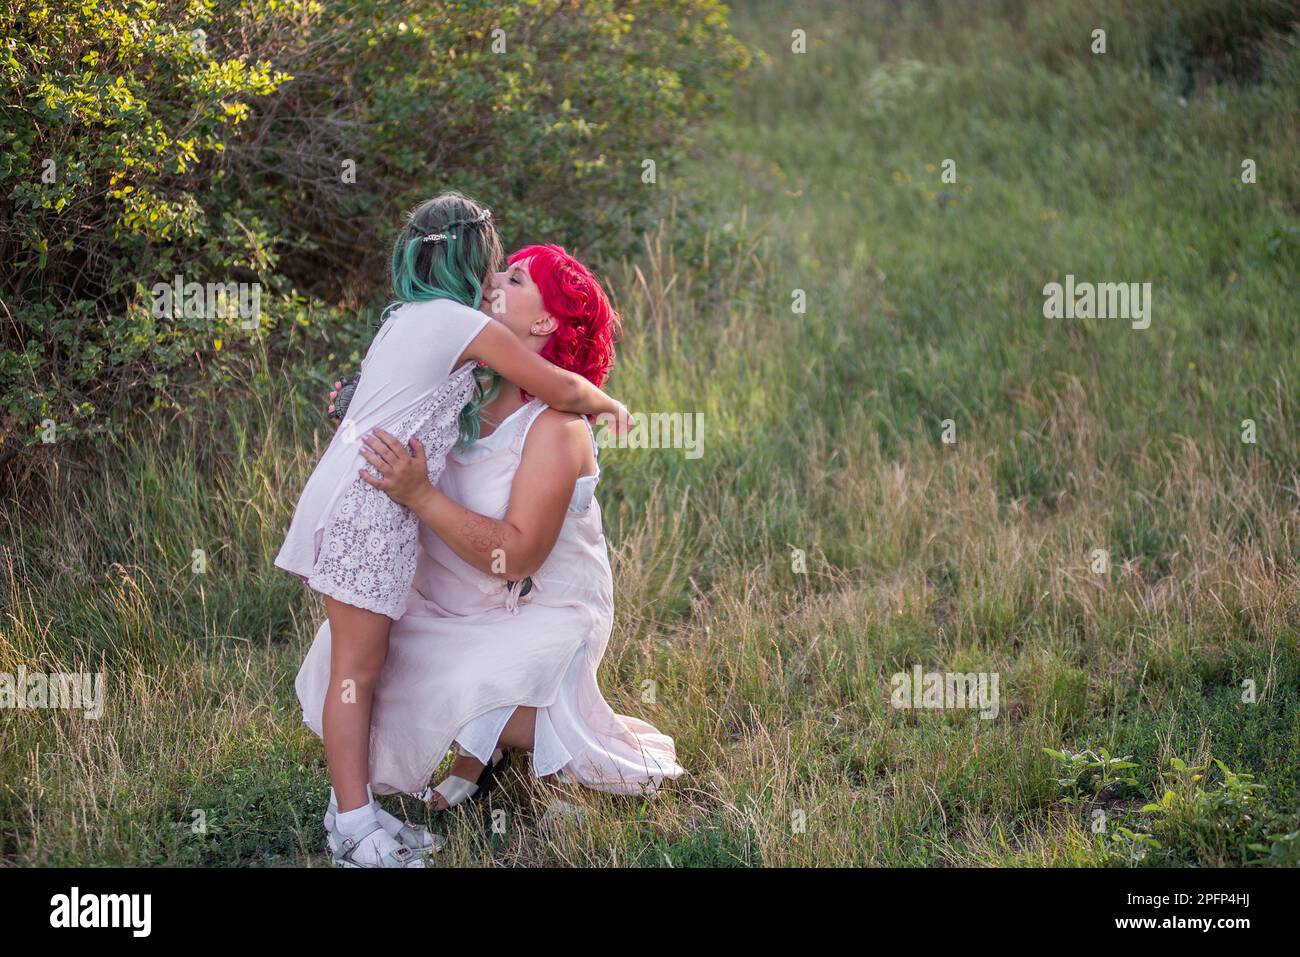 Bright, diversity, extraordinary mother and daughter hugging in the forest. Woman has pink hair, the girl has green hair. Tender motherhood, happy chi Stock Photo